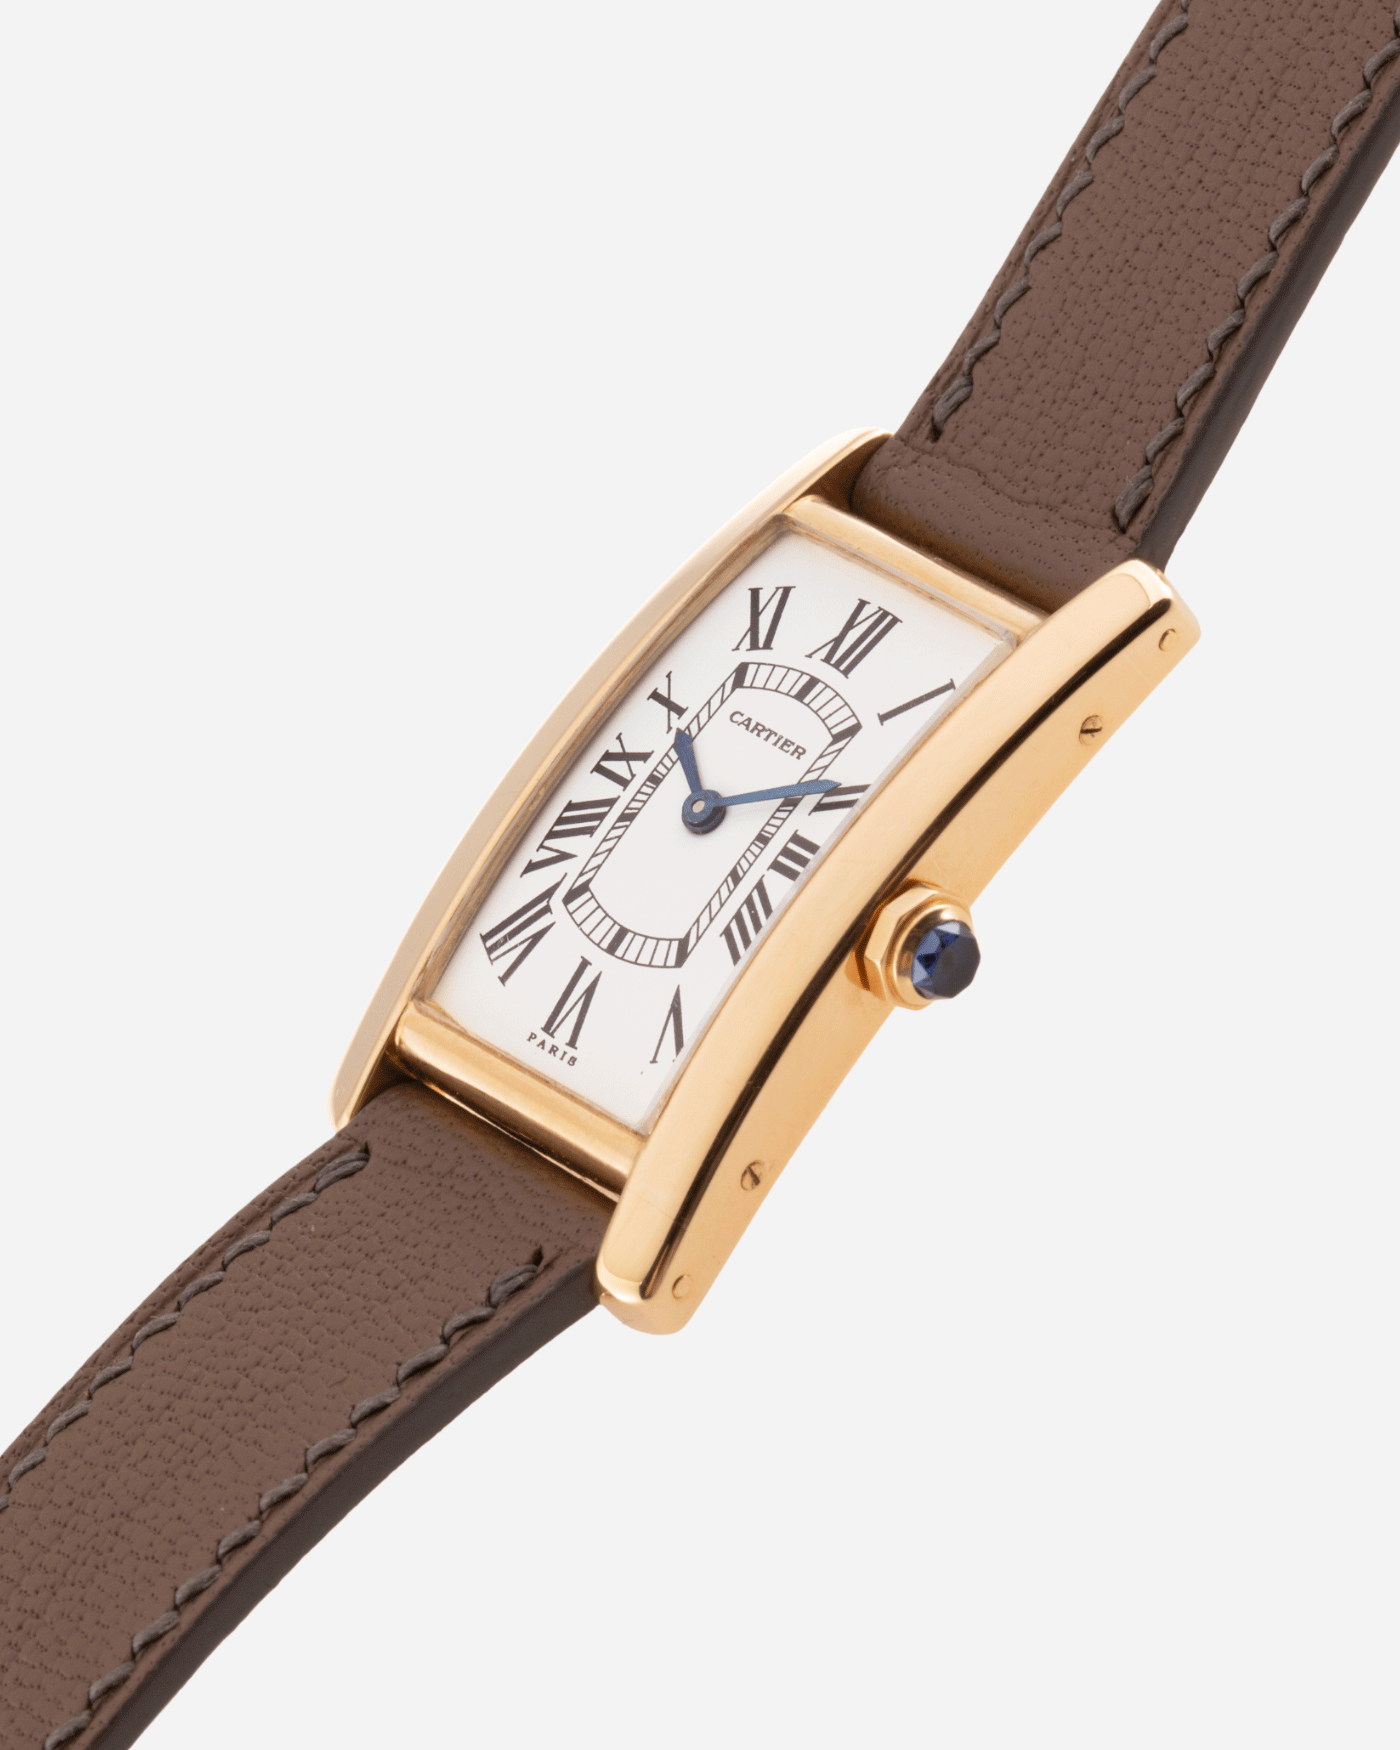 Brand: Cartier Year: 1970’s Model: Tank Cintree Mid Size Material: 18k Yellow Gold Movement: Manually Wound Jaeger Movement Case Diameter: 36mm X 20mm Strap: Custom Taupe Leather Strap and Original 18k Yellow Gold Cartier Deployant